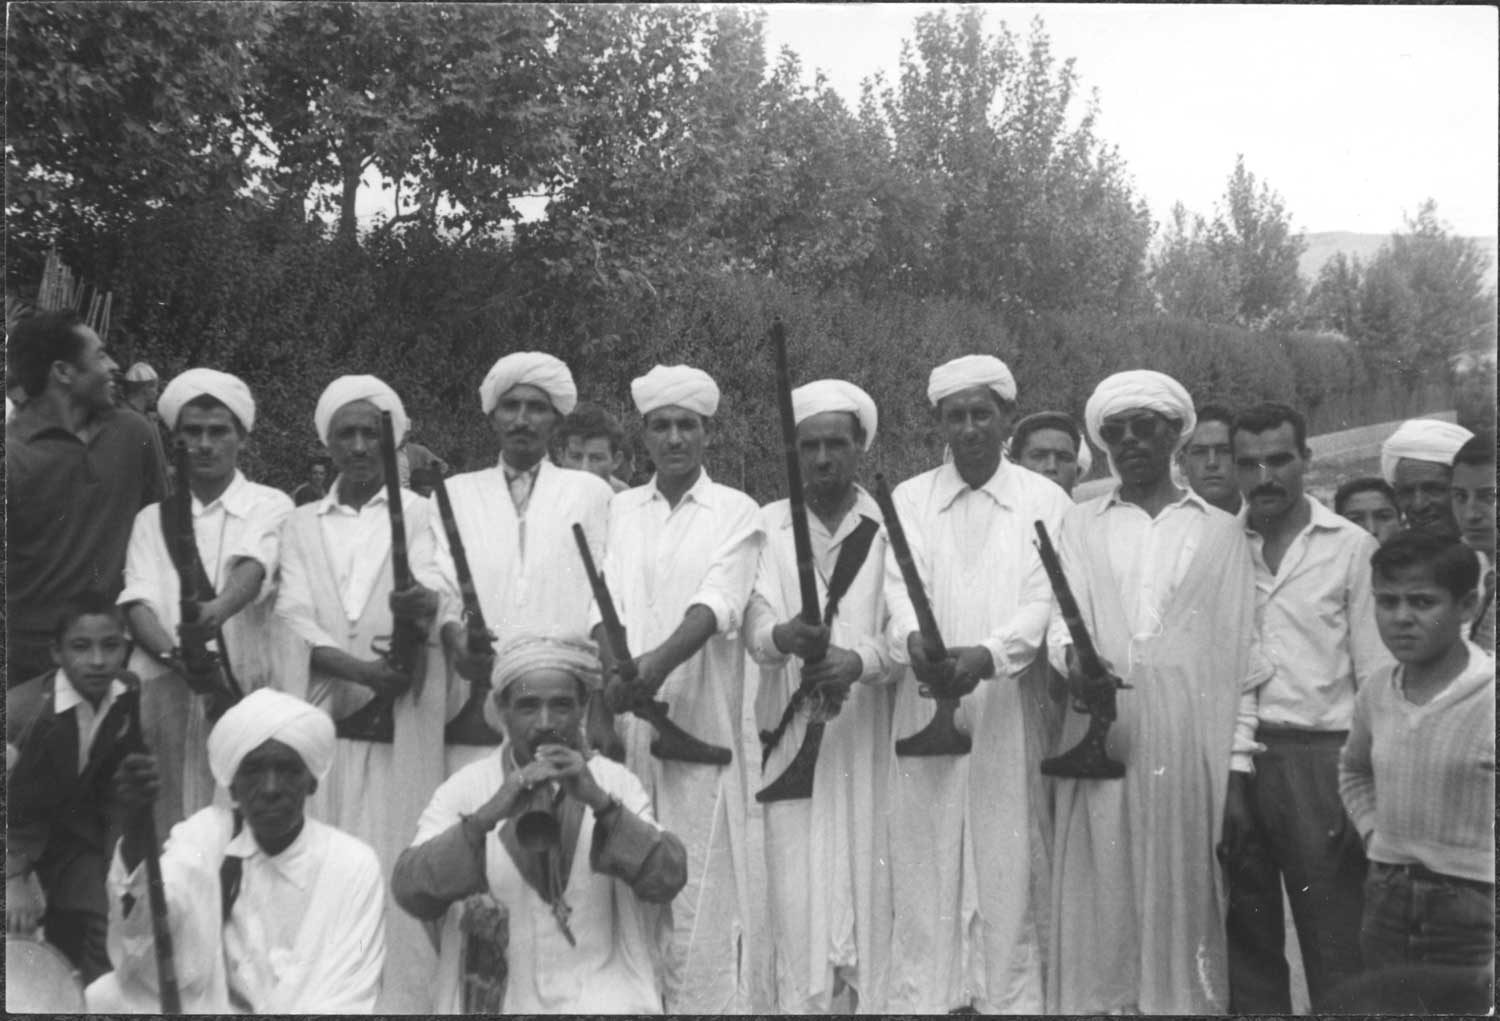 View of the men from the Allal ben Mohammed Kaaoui Ensemblemble with their rifles and a ghaita 